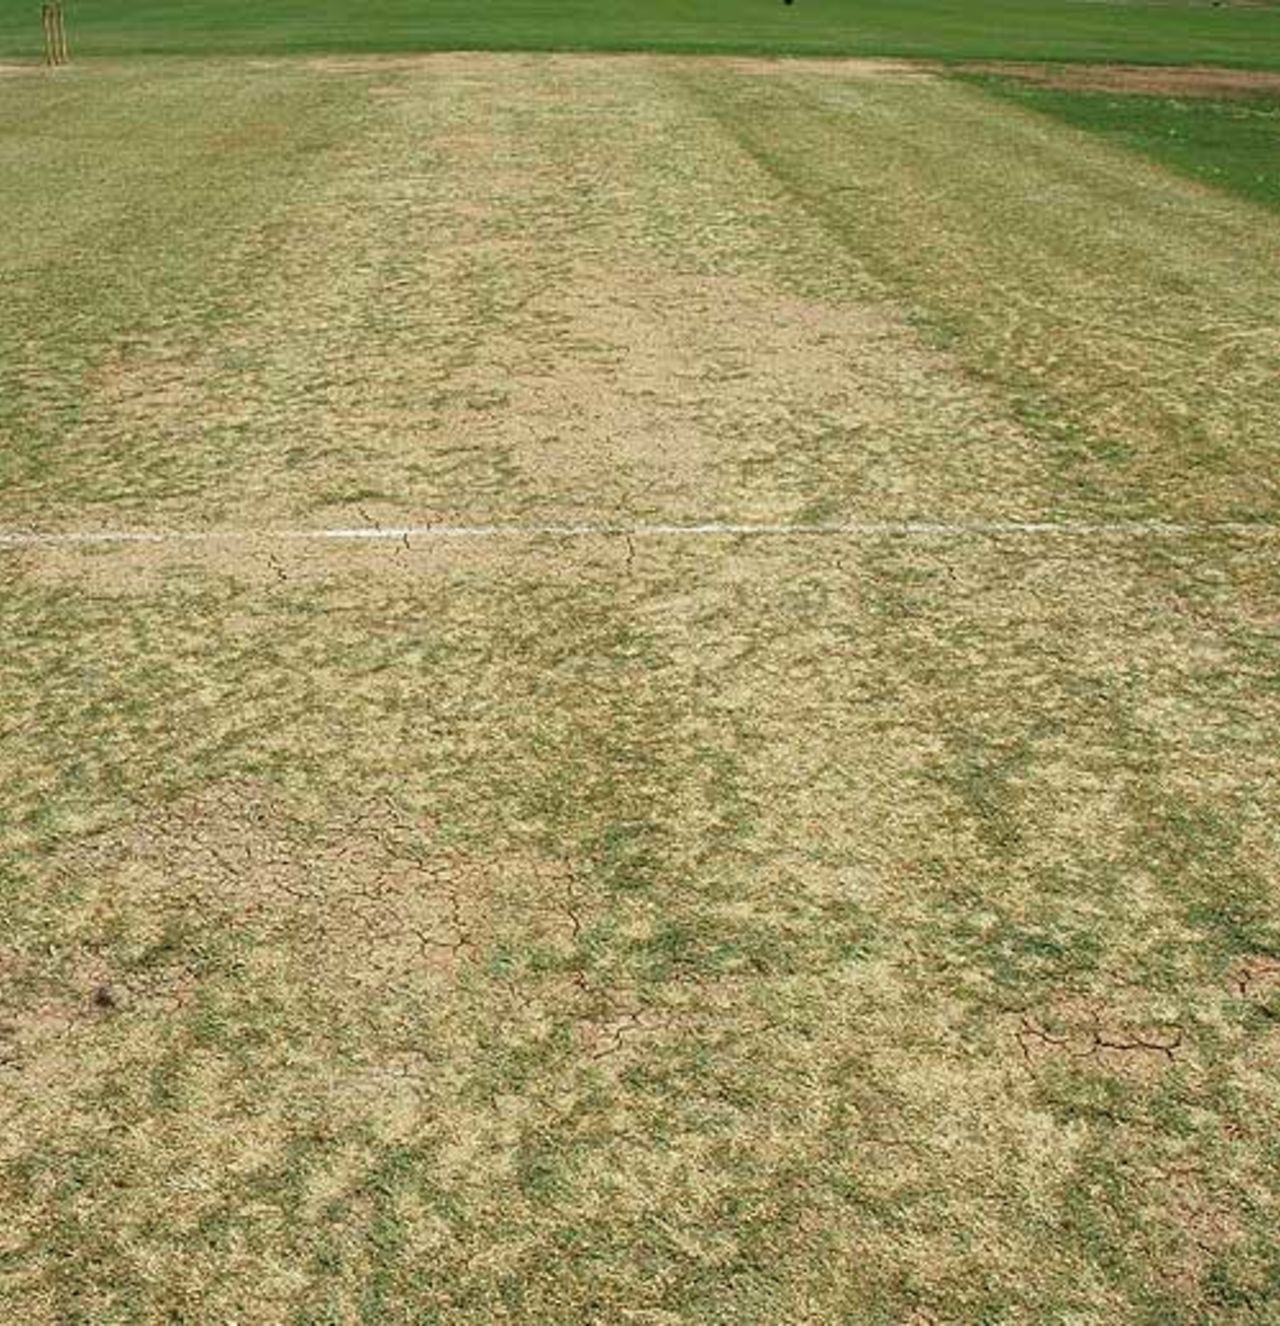 A view of the Queen's Park Oval pitch, Trinidad, March 29, 2008